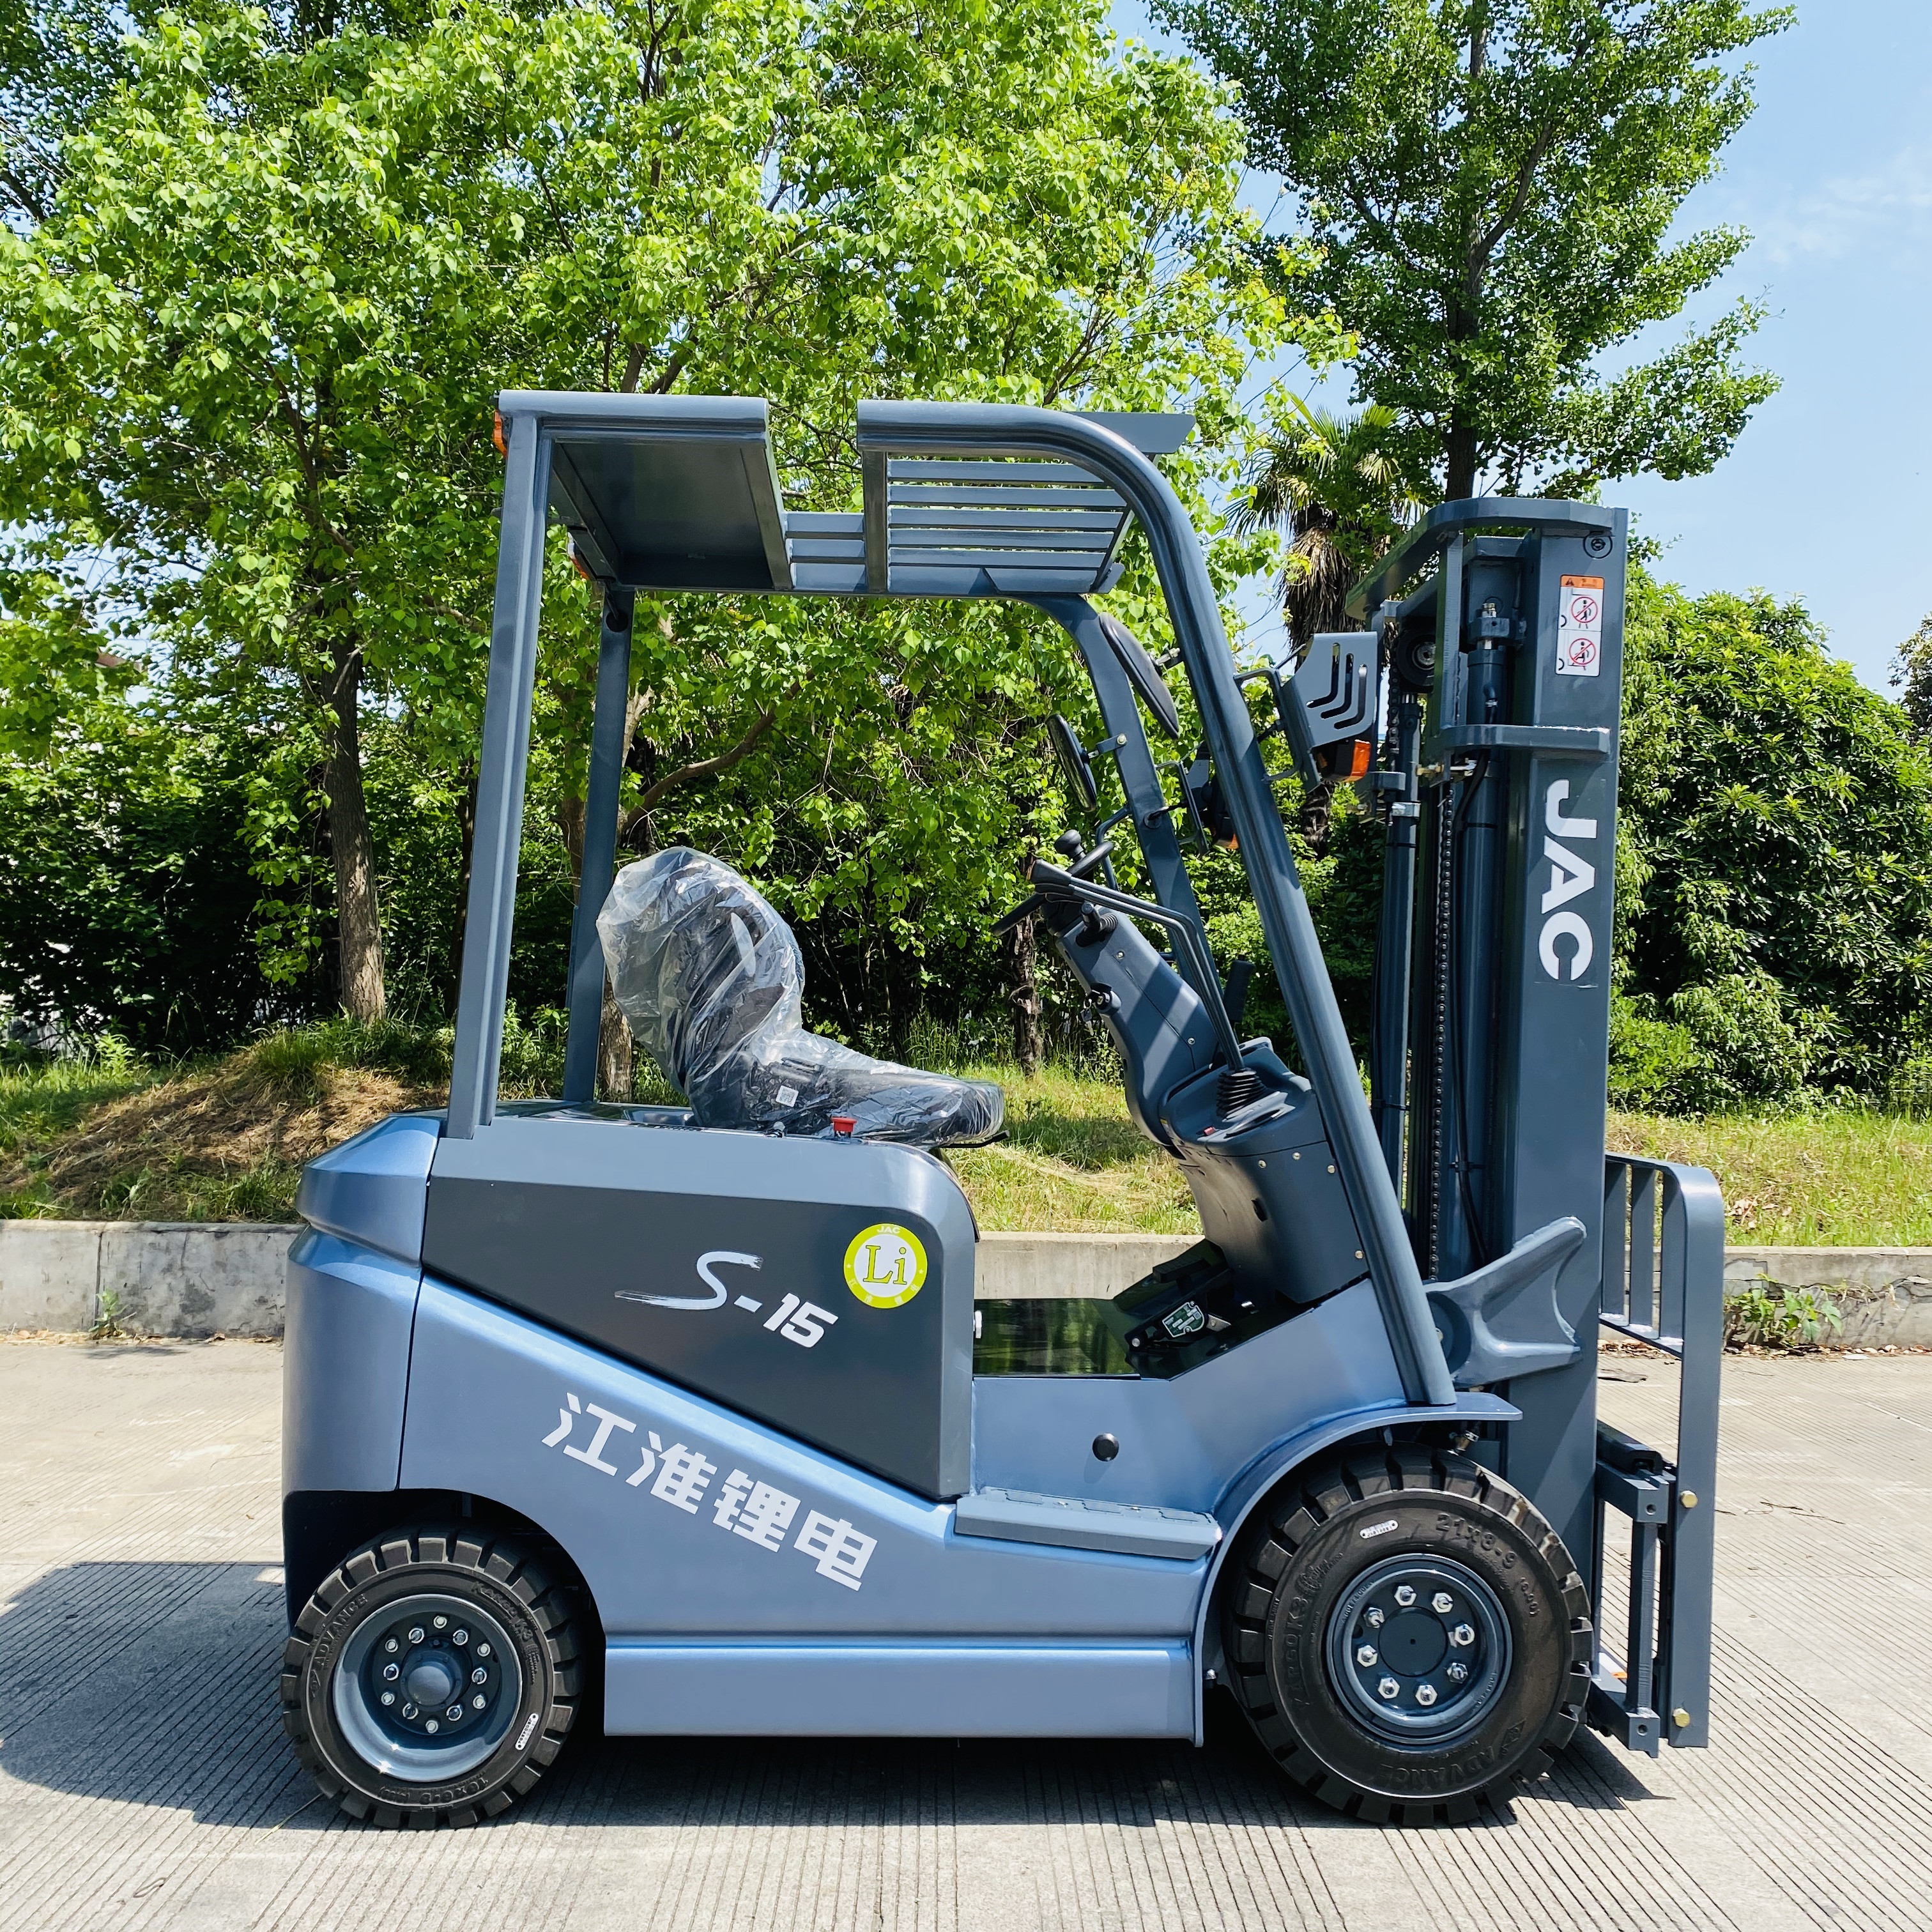 1.5-1.8T S Series Counterbalanced Lithium Battery Forklift